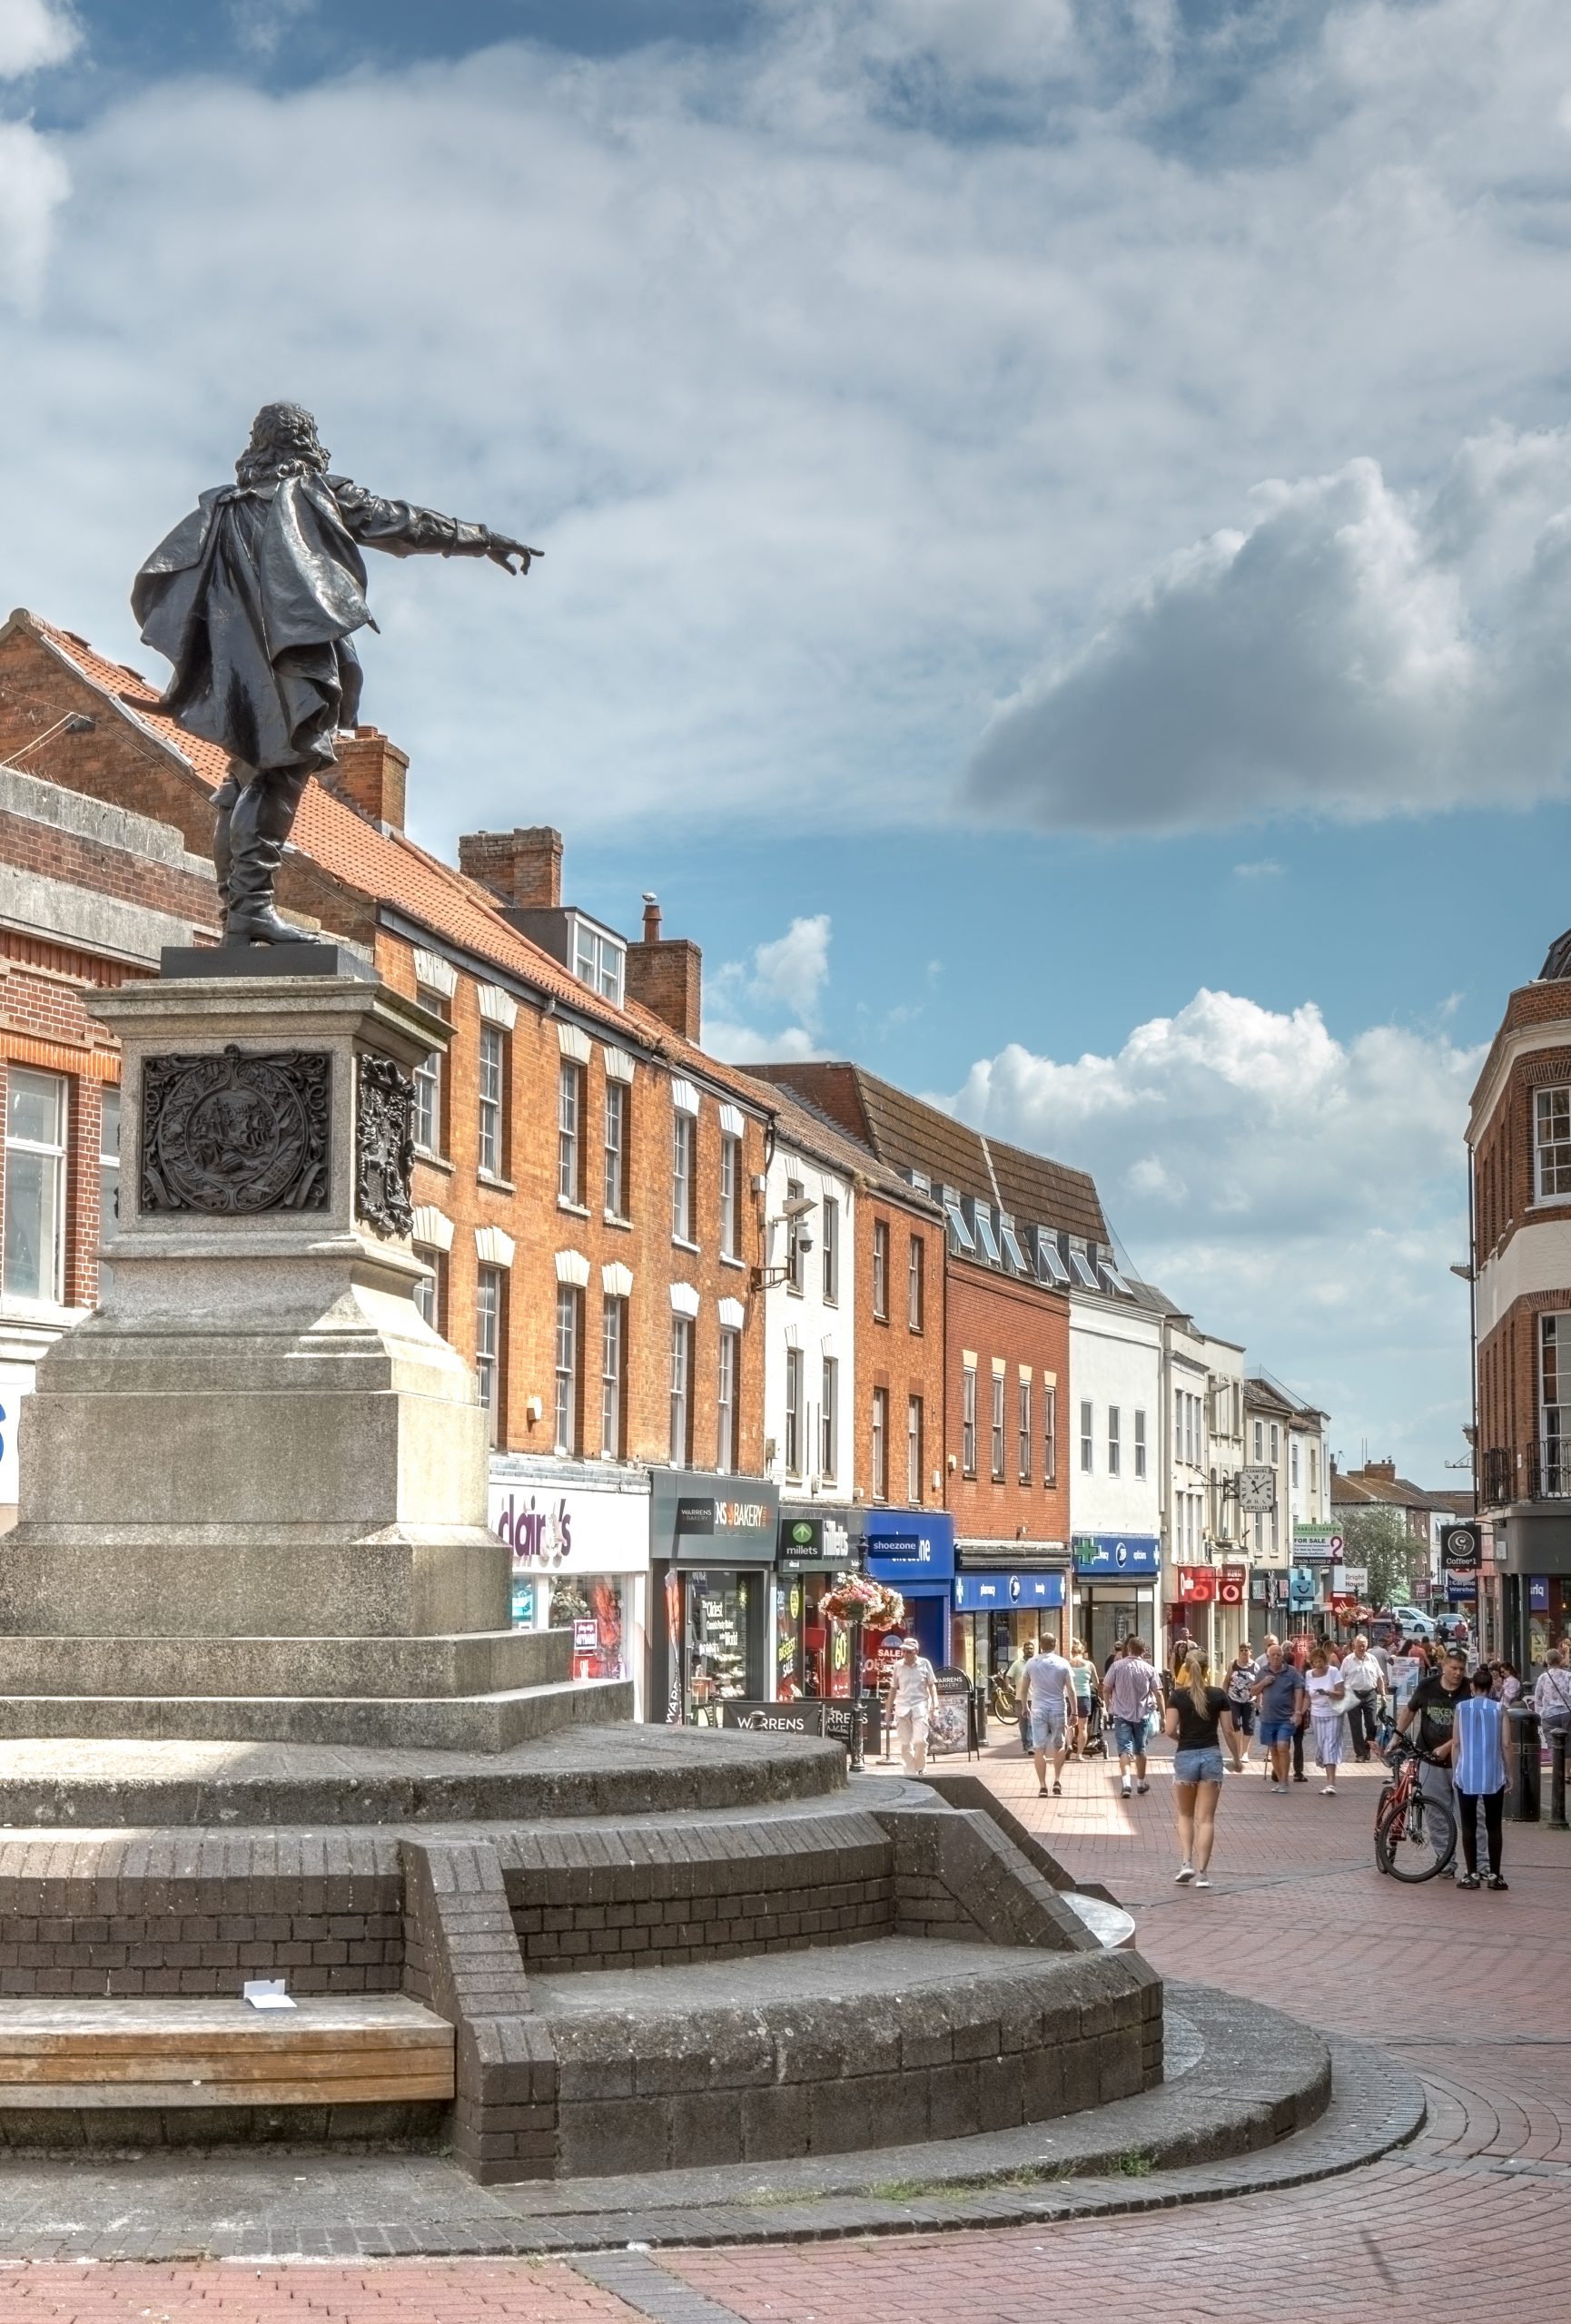 Blake statue overlooking Fore Street